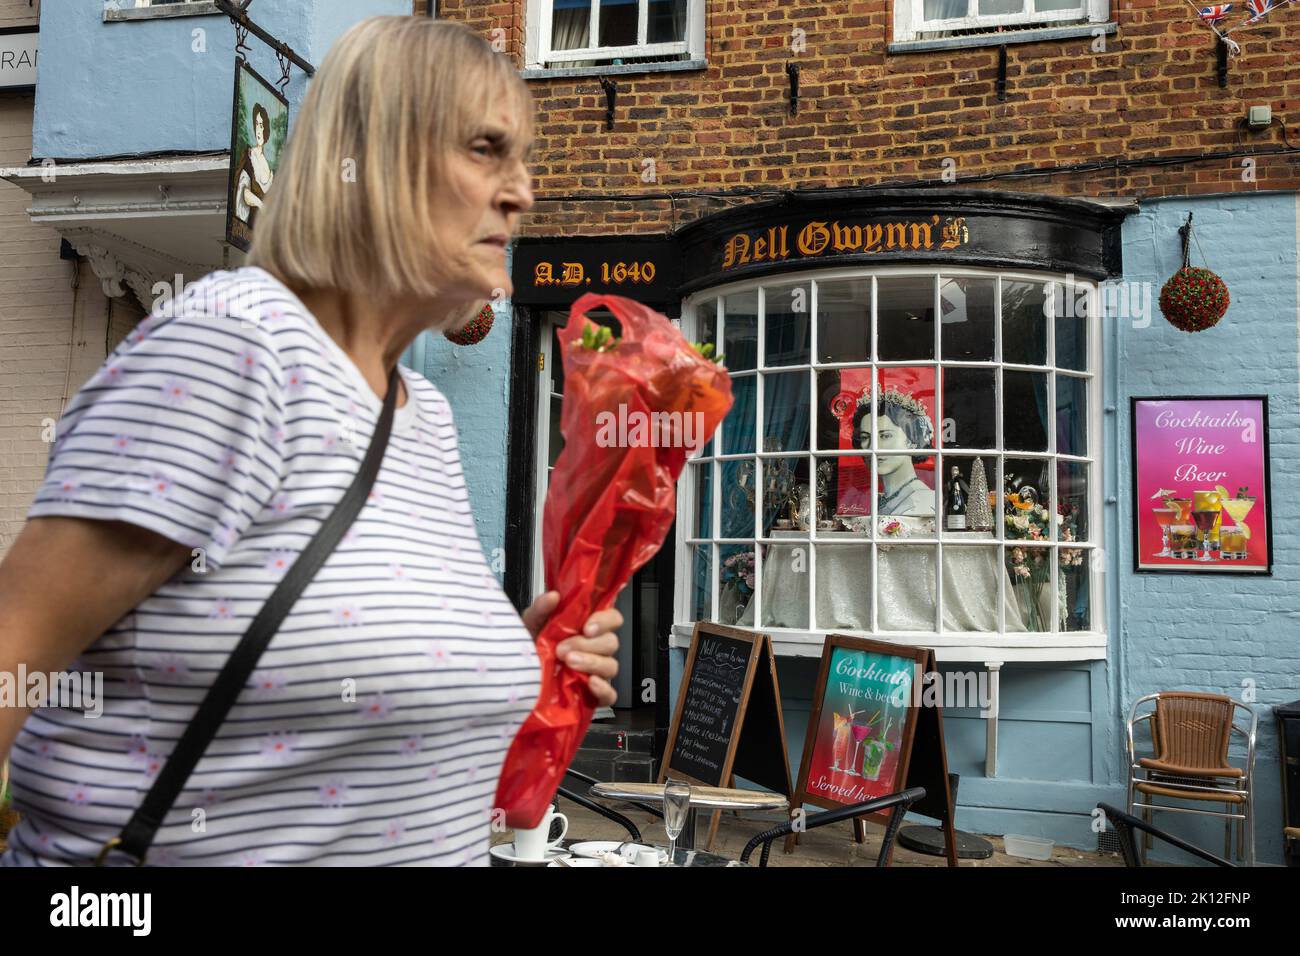 Windsor, UK. 14th September, 2022. A woman carrying flowers passes a tribute to Queen Elizabeth II displayed in a restaurant window. Queen Elizabeth II, the UK's longest-serving monarch, died at Balmoral aged 96 on 8th September after a reign lasting 70 years and will be buried in the King George VI memorial chapel in Windsor following a state funeral in Westminster Abbey on 19th September. Credit: Mark Kerrison/Alamy Live News Stock Photo